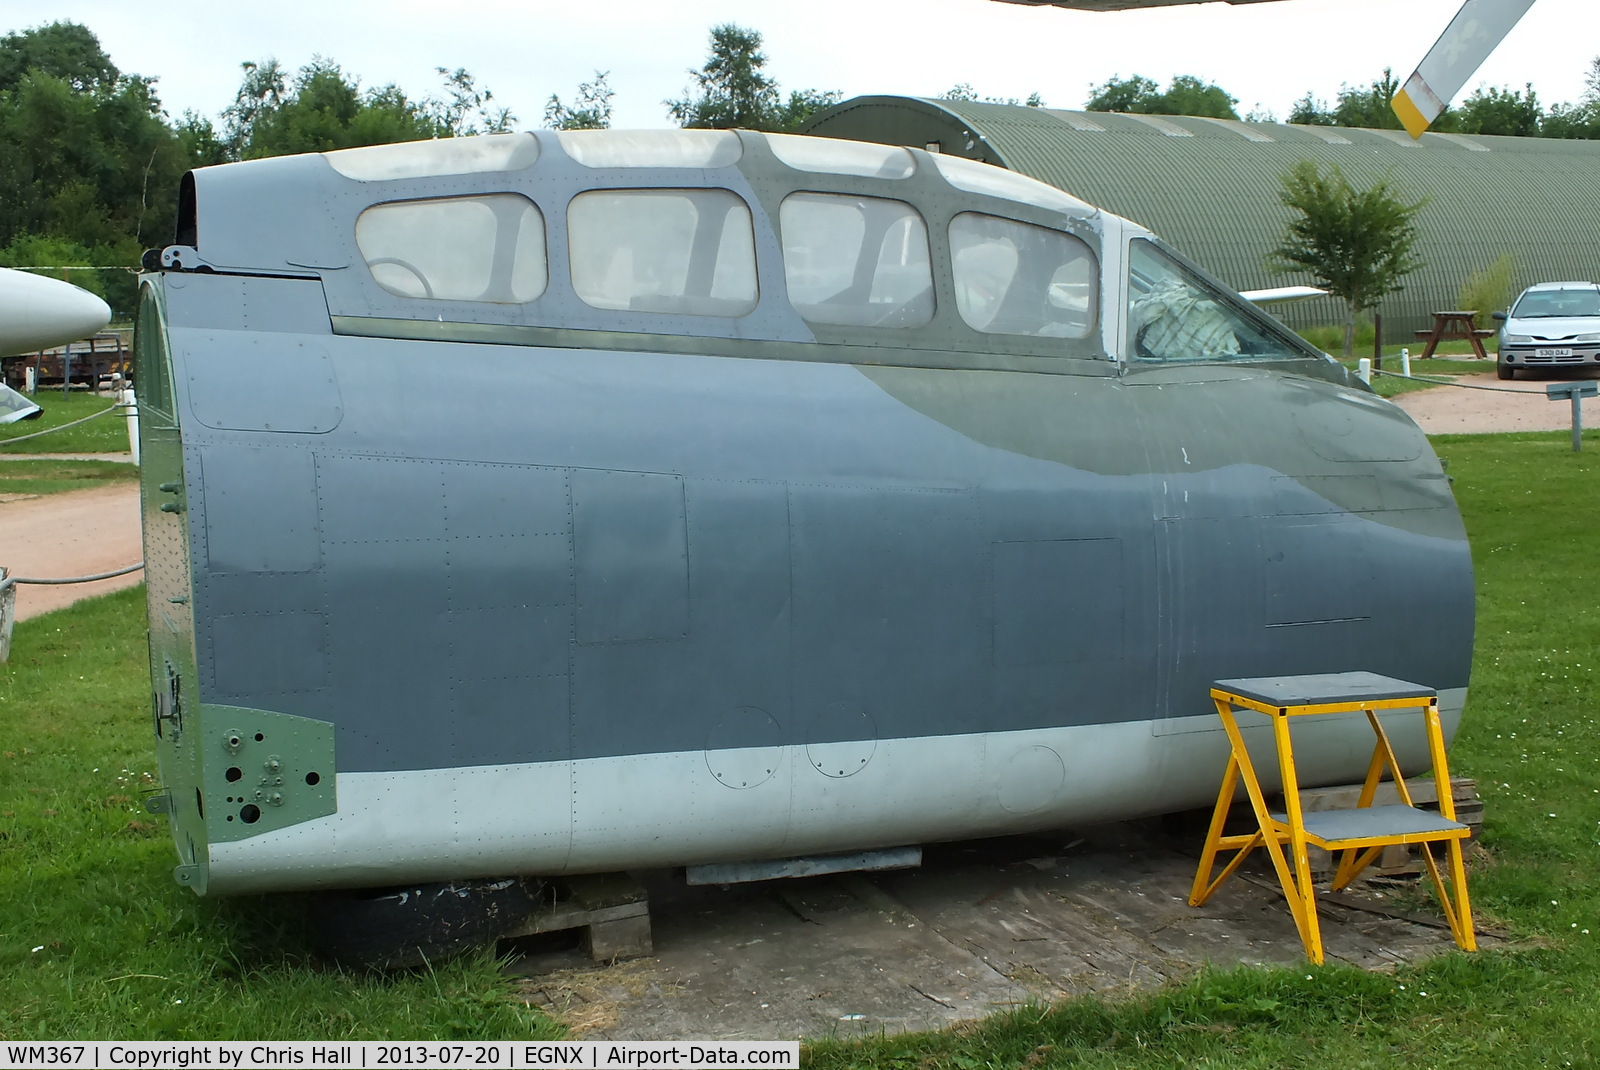 WM367, 1953 Gloster Meteor NF.11 C/N Not found WM367, Preserved at the East Midlands Aeropark